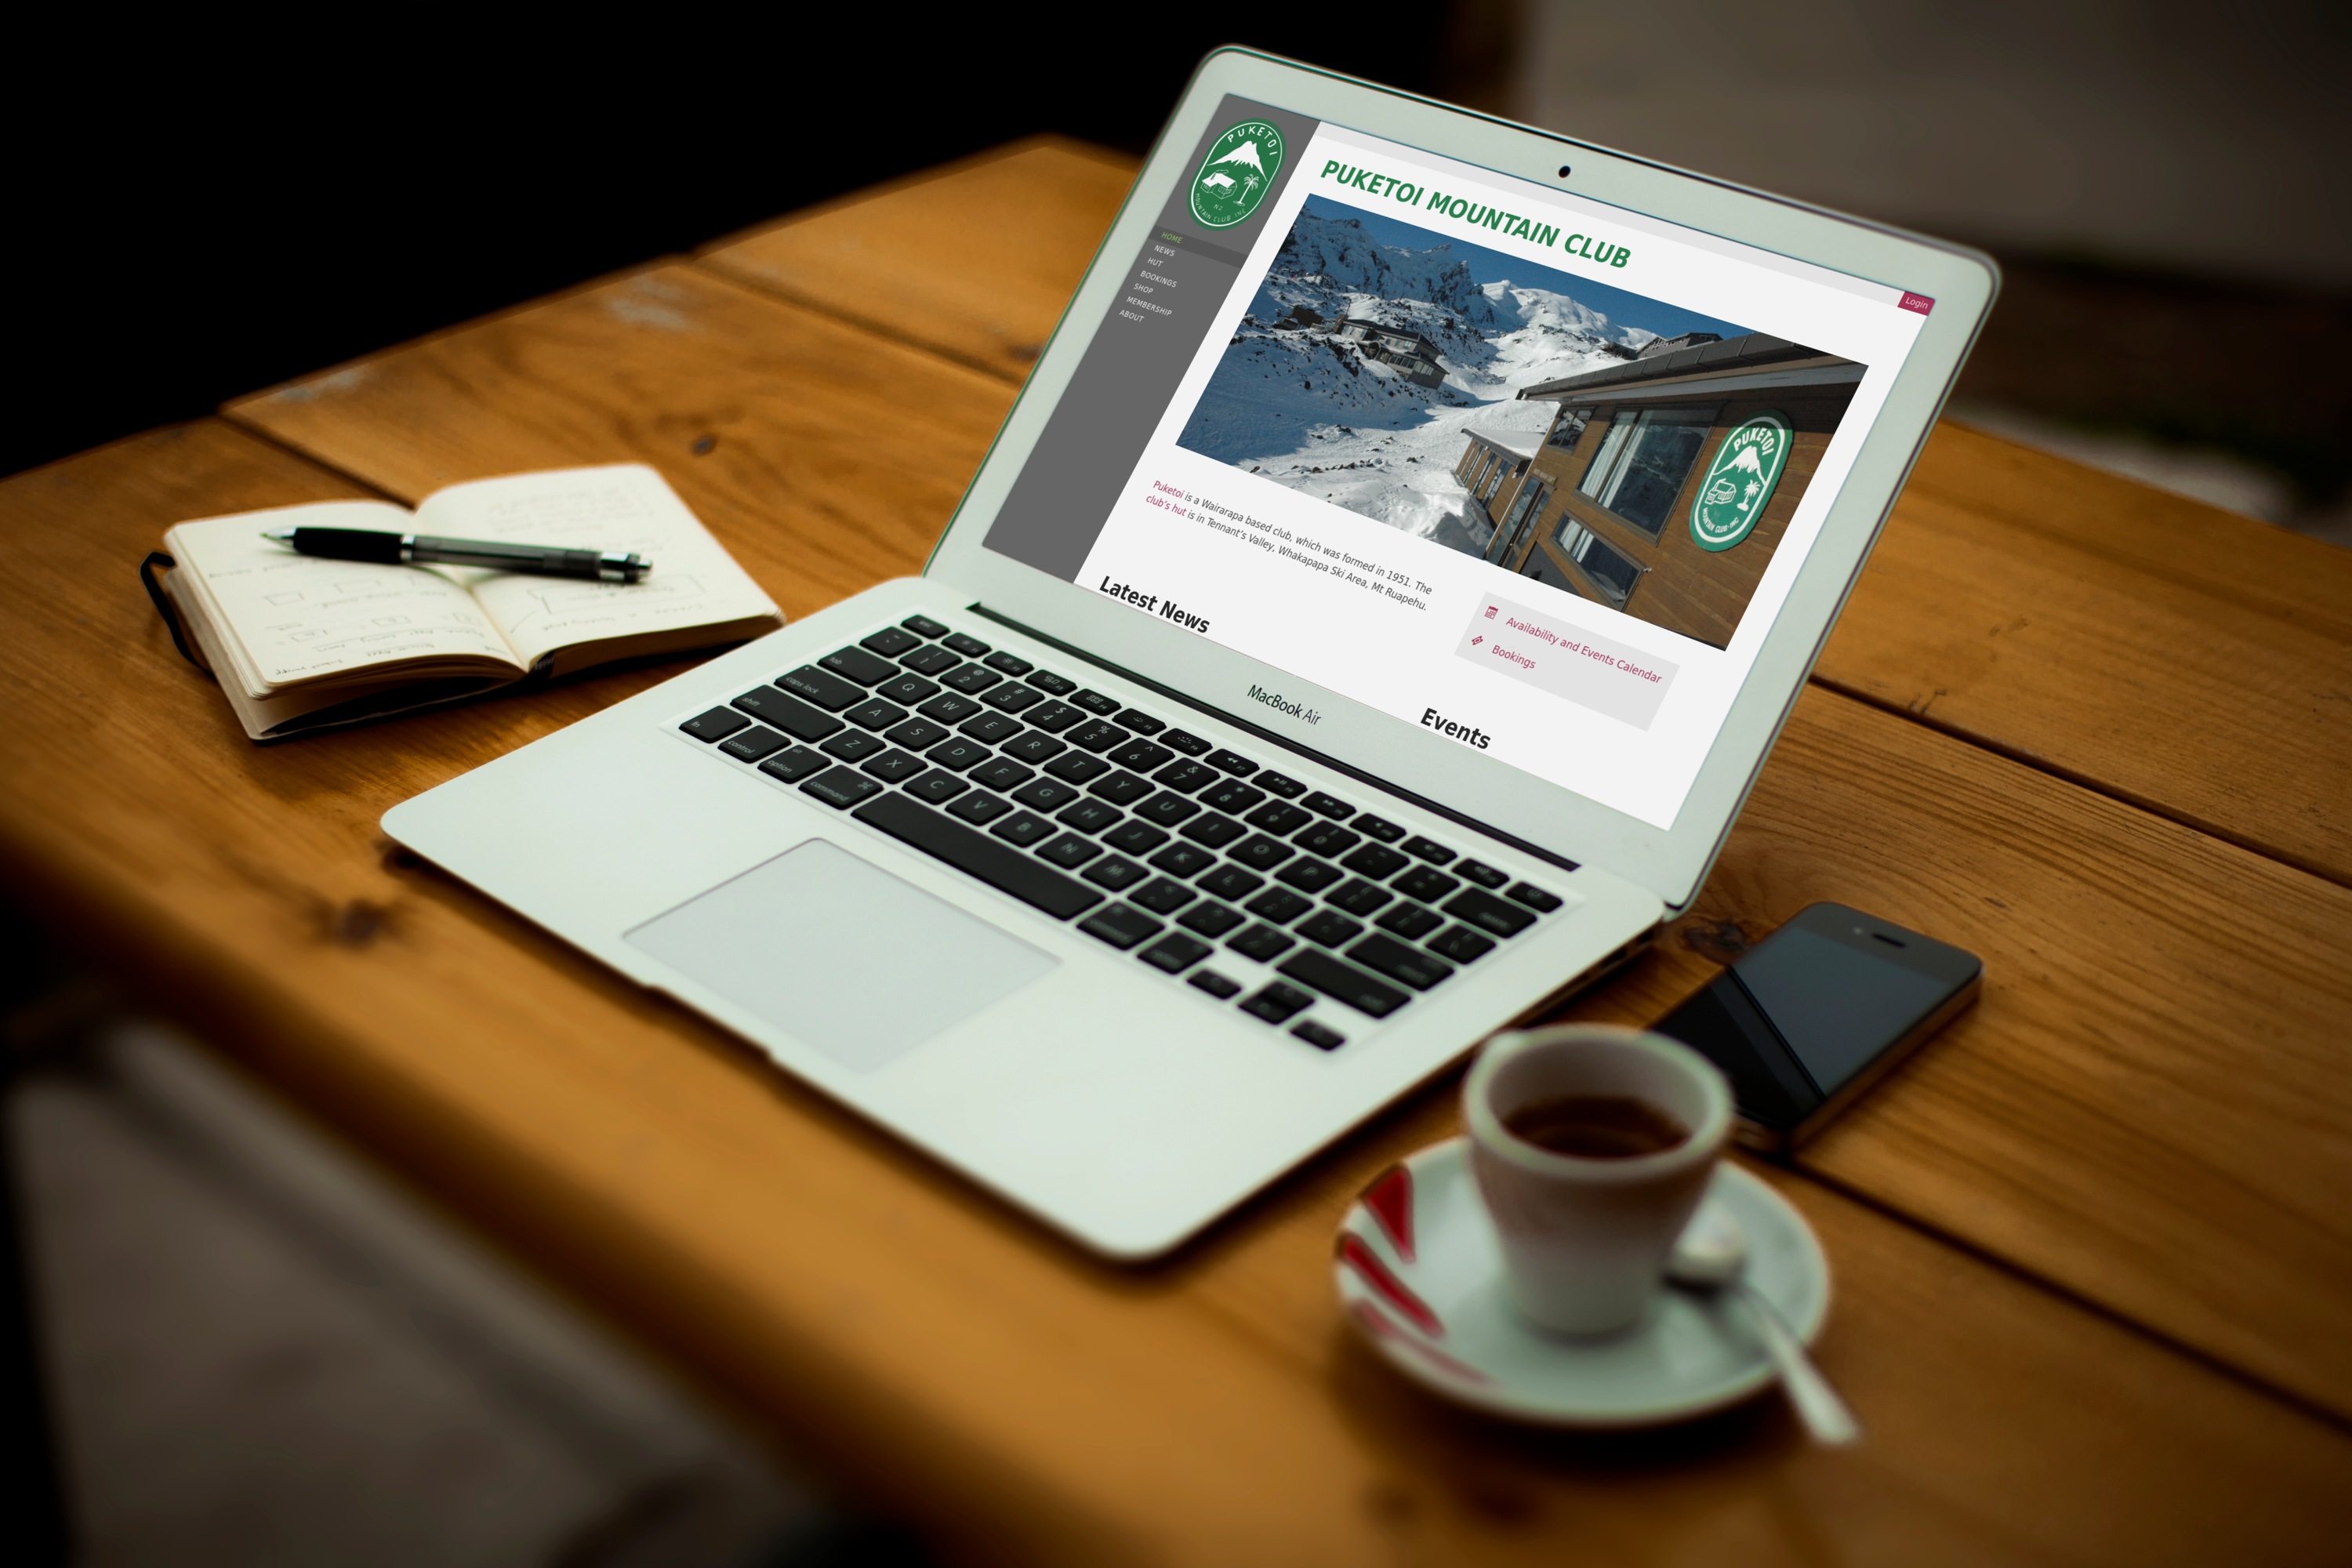 Mockup of the Puketoi Mountain Club website on a MacBook Air